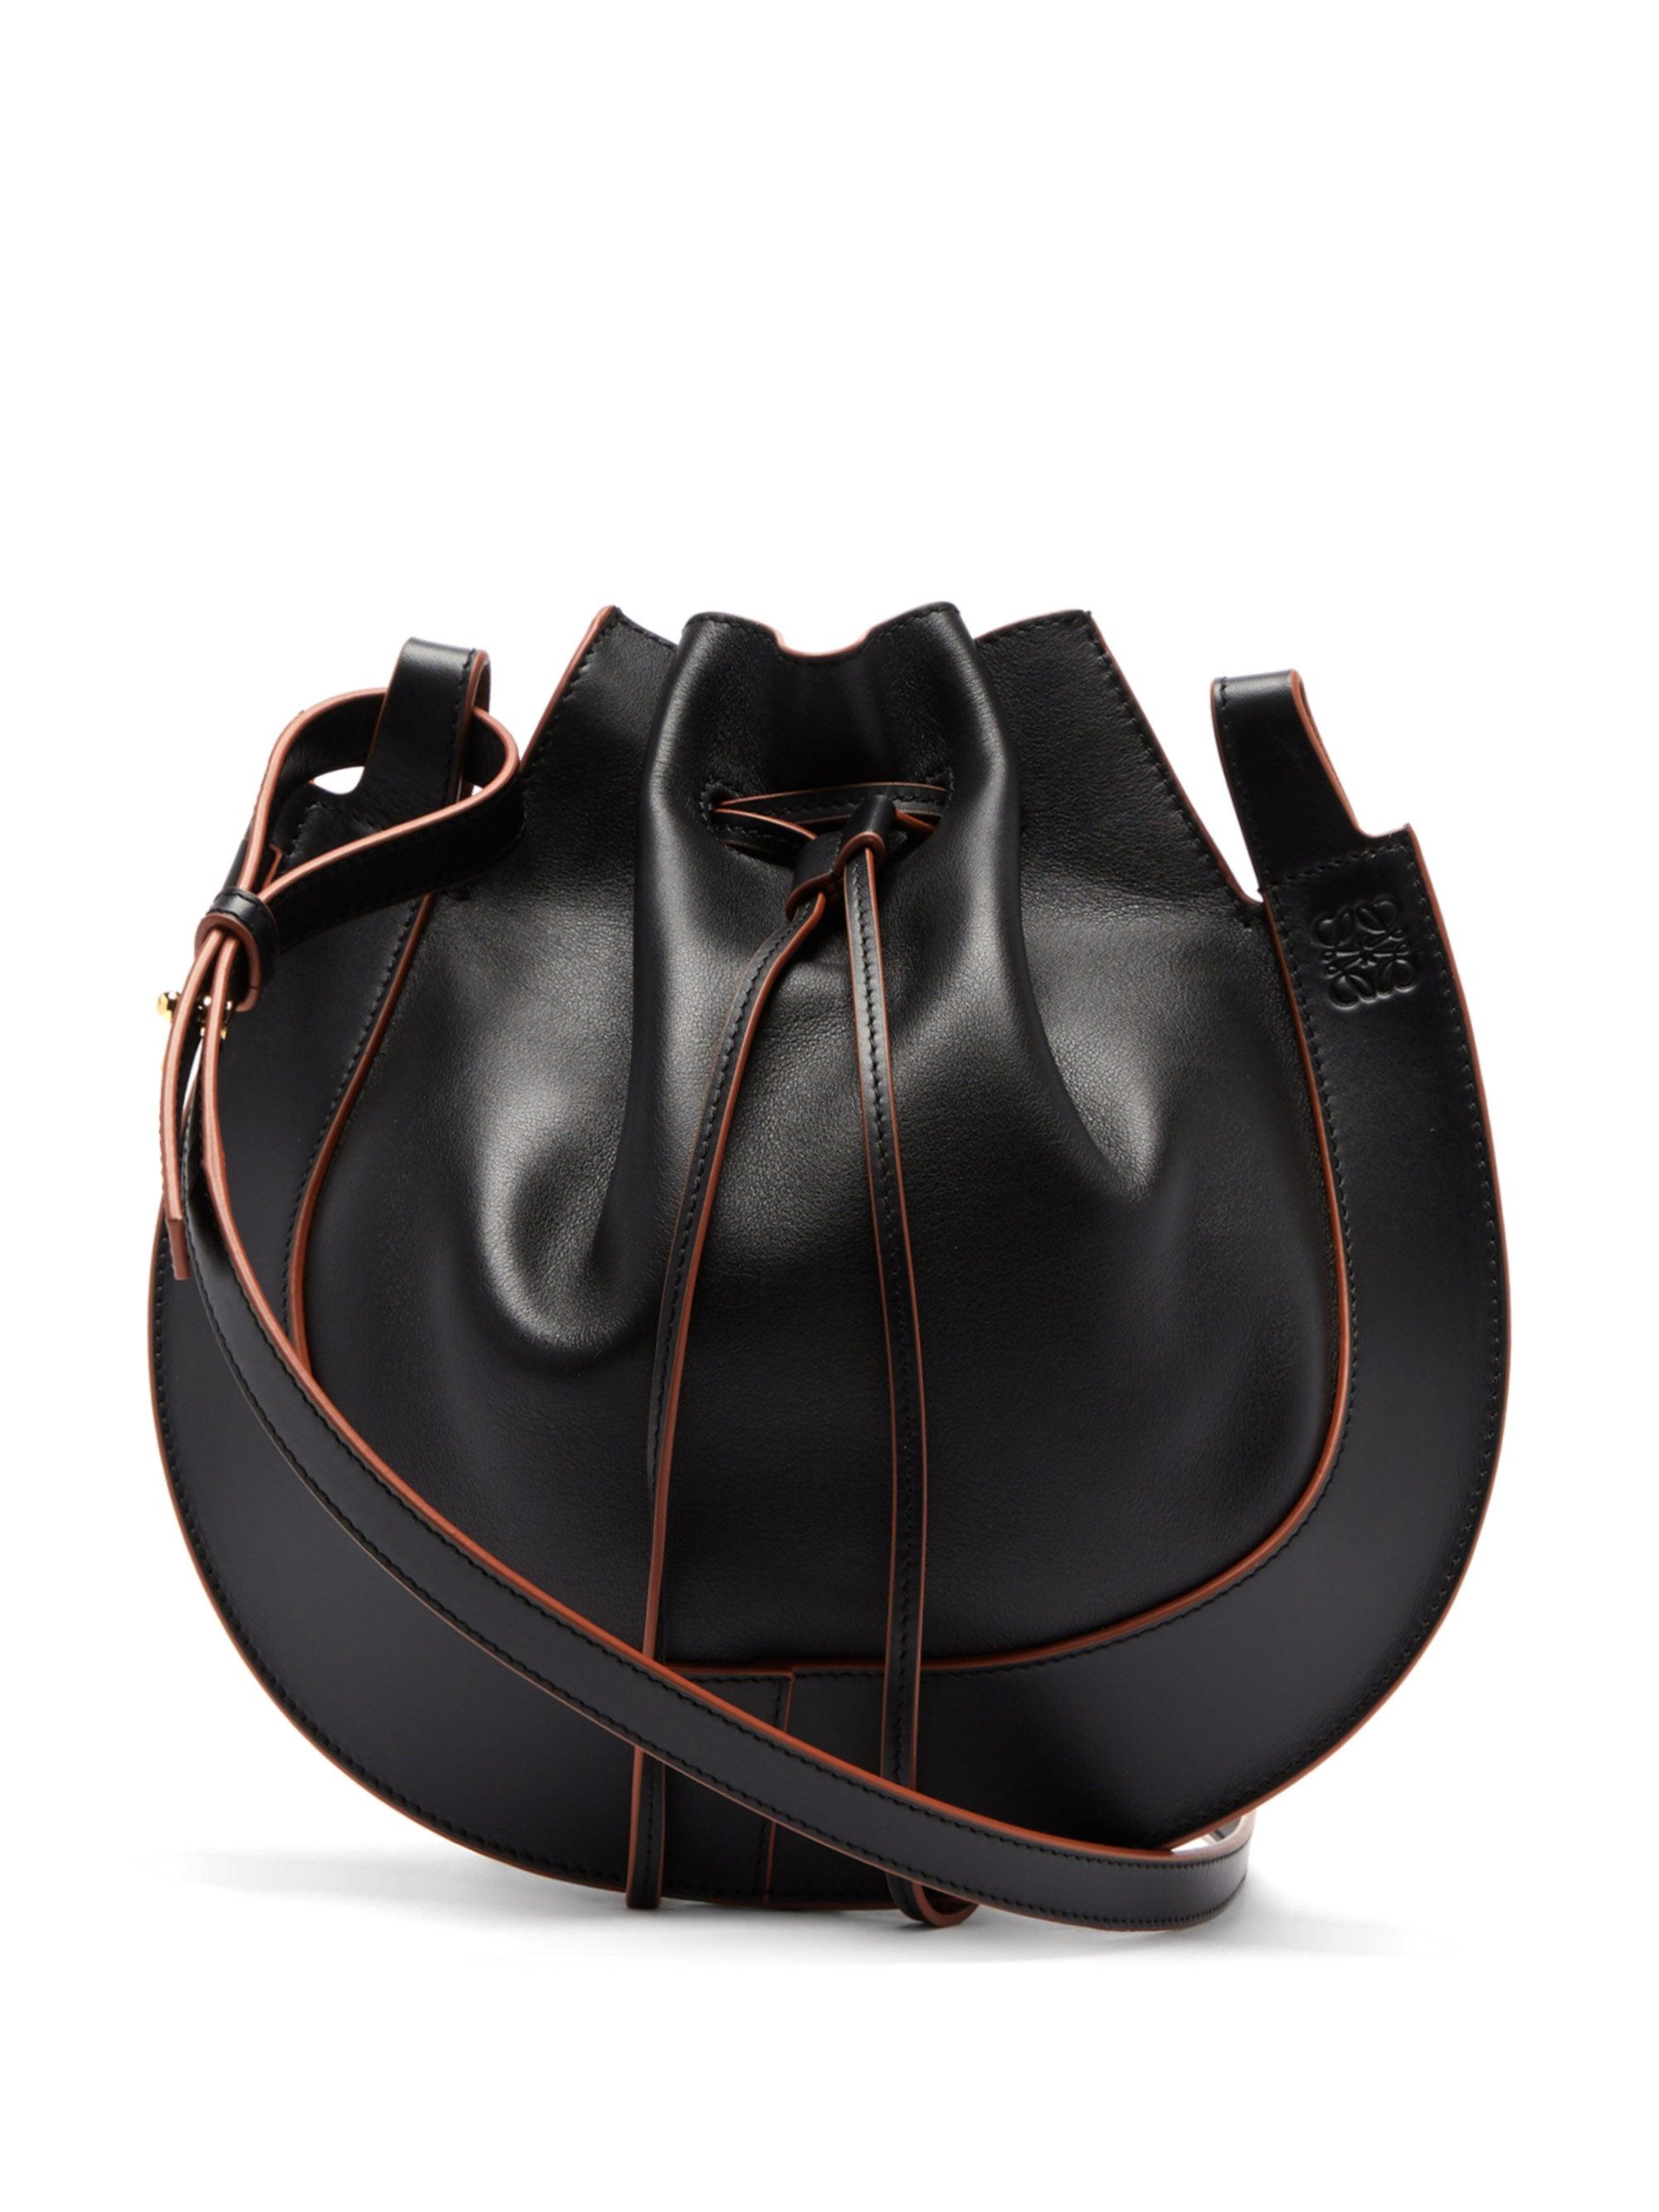 Loewe Small Horseshoe Colorblock Leather Saddle Bag In Narcissus